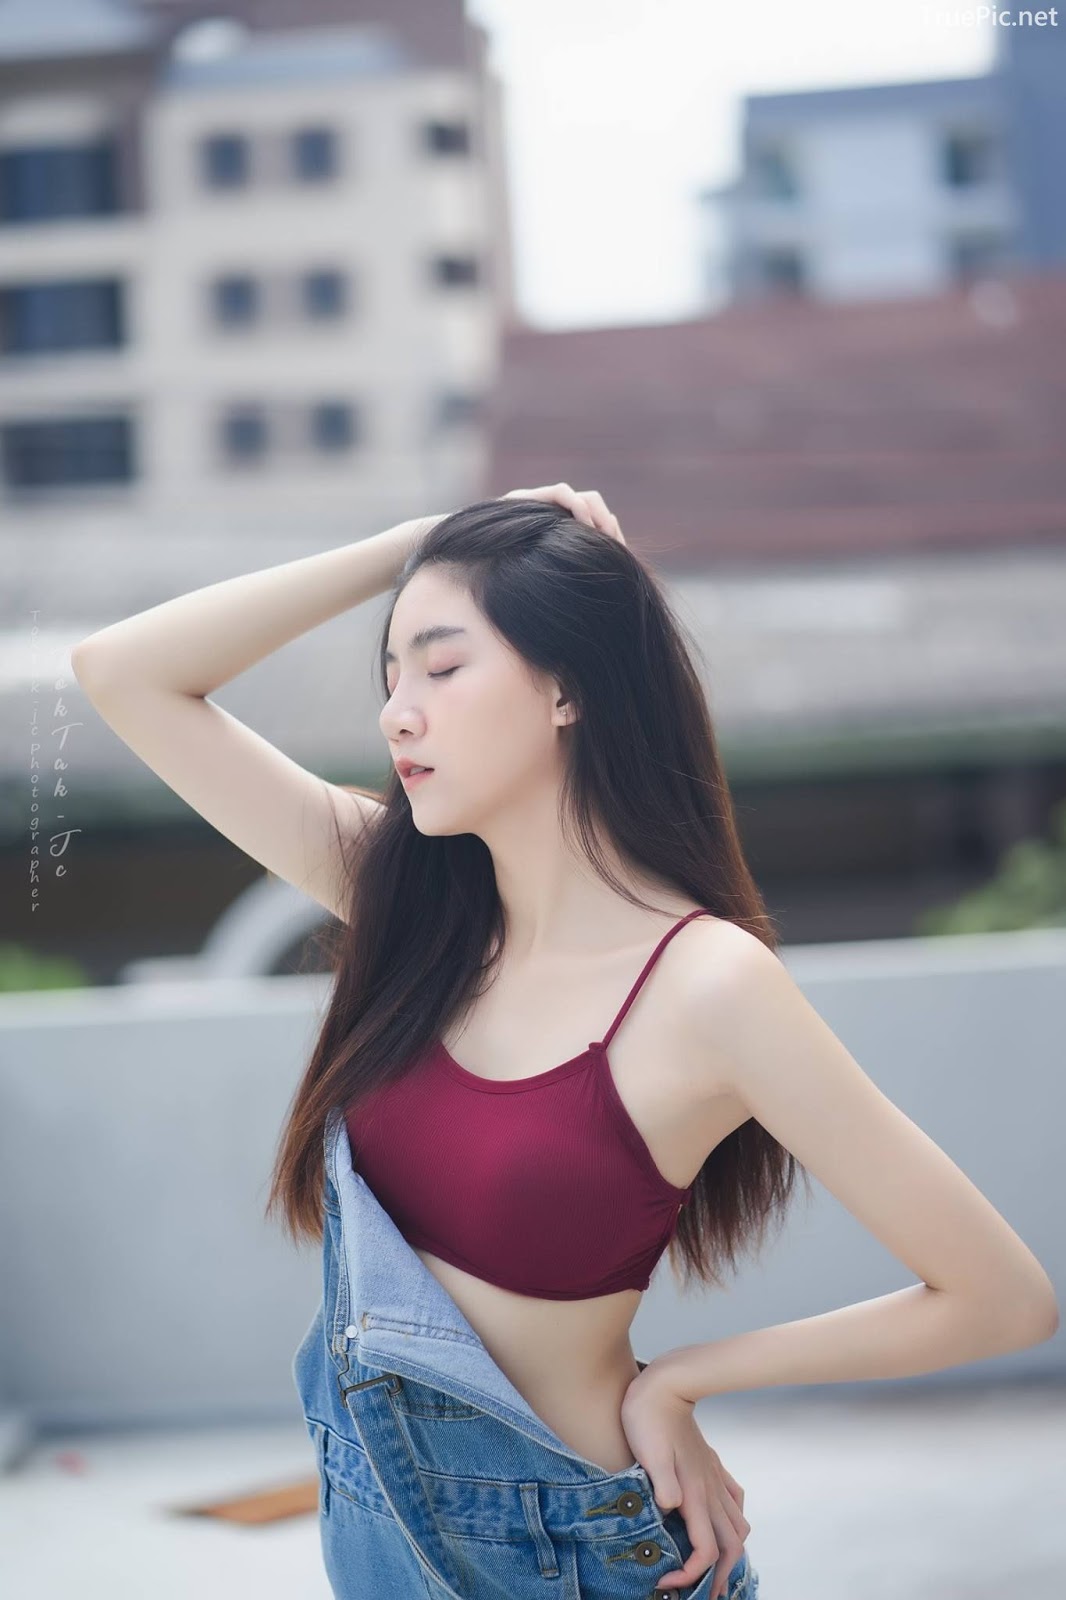 Thailand angel model Sasi Ngiunwan - Red plum bra and jean on a beautiful day - Picture 17